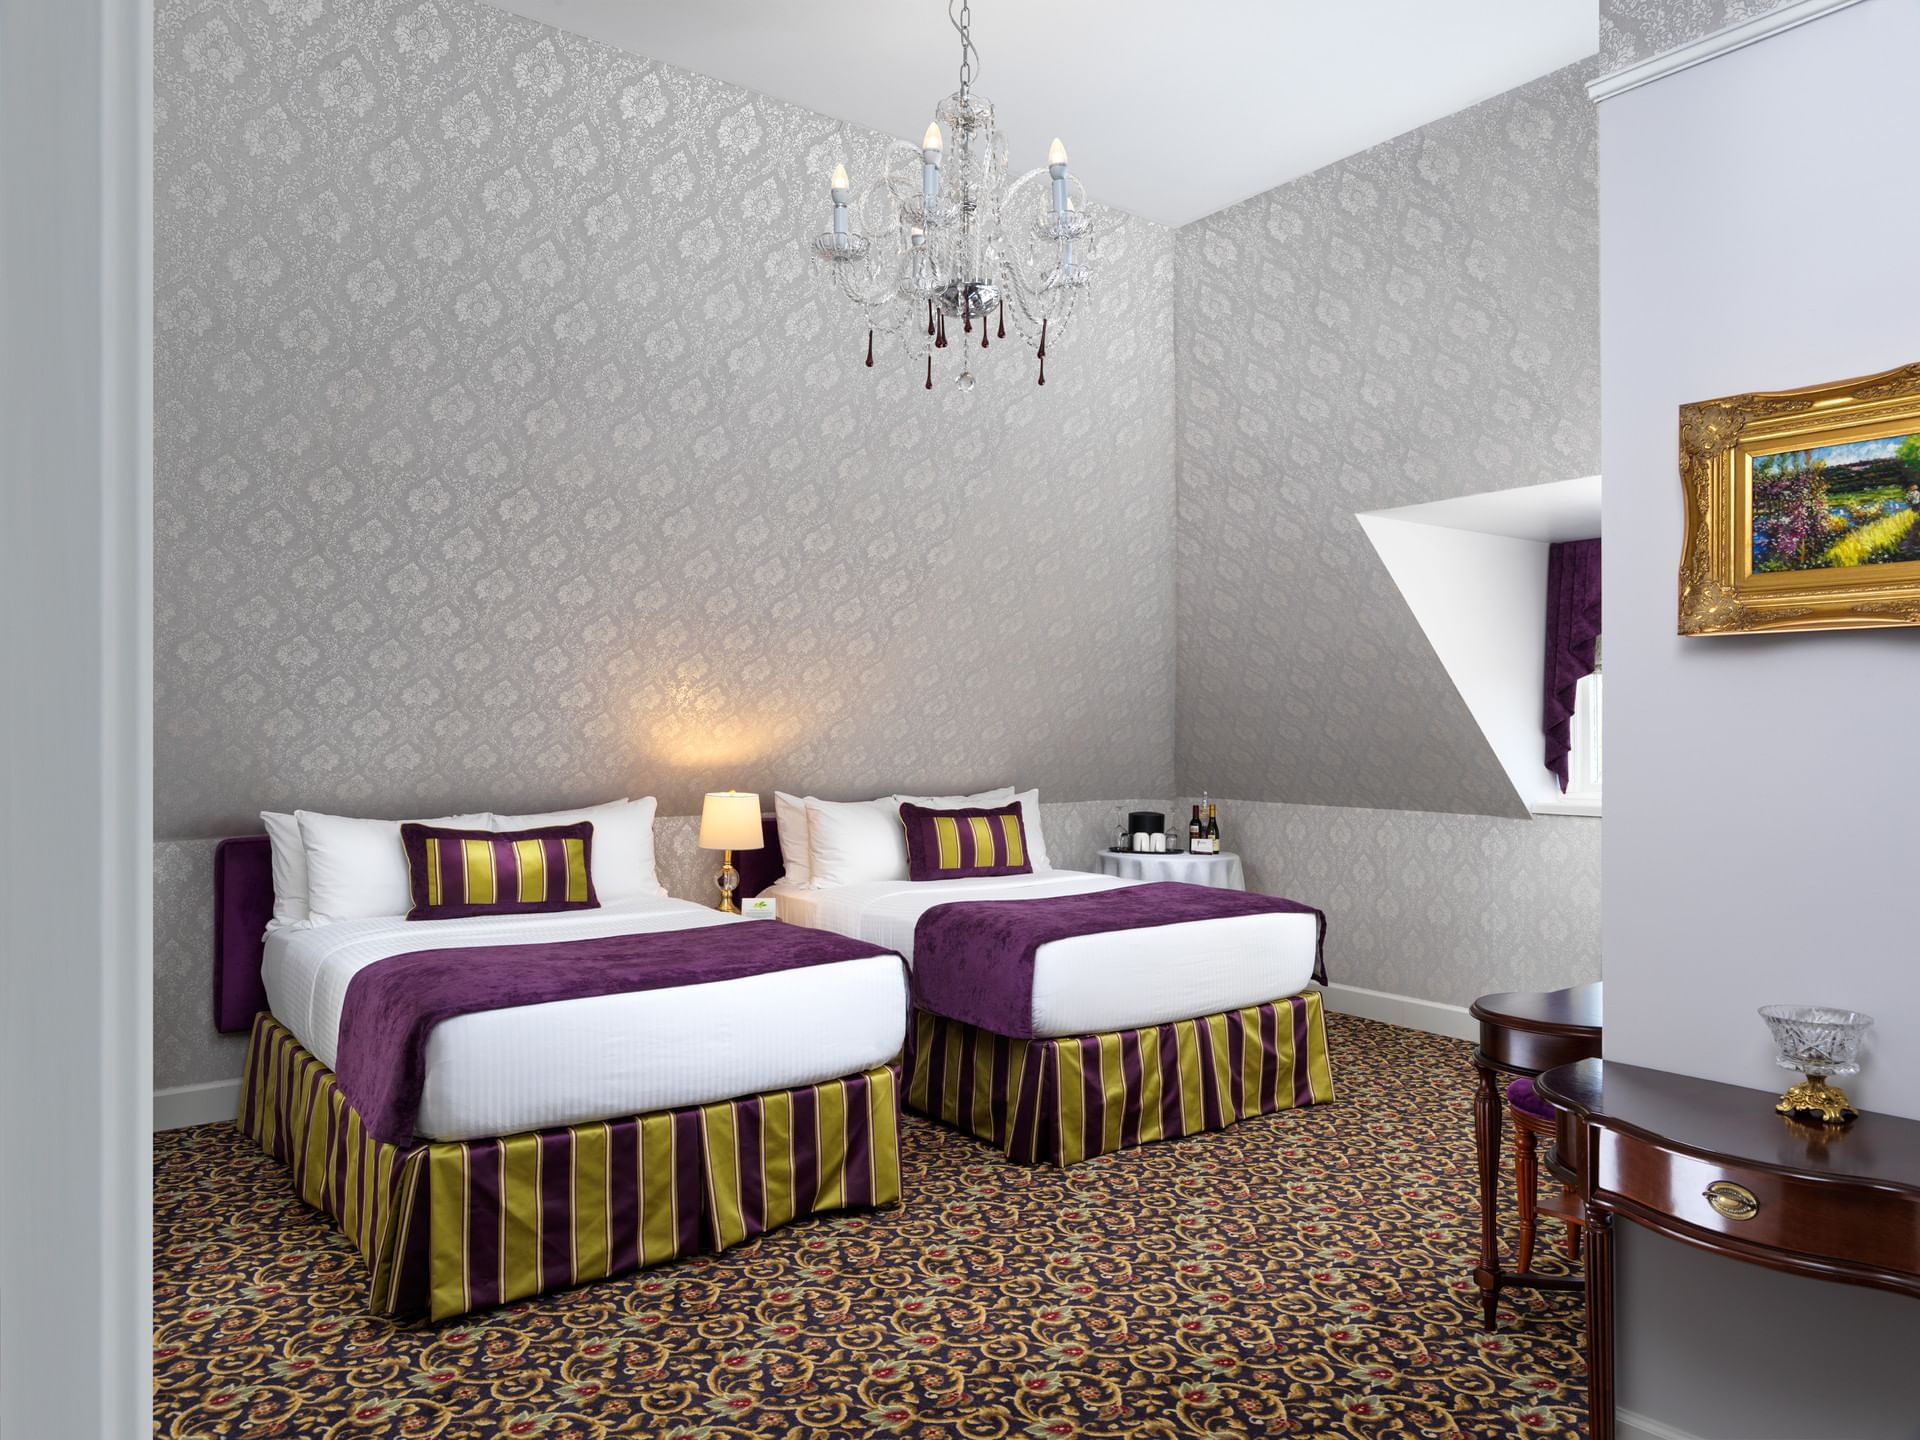 Two double beds and a chandelier in Amelia Jane Room at Pendray Inn & Tea House